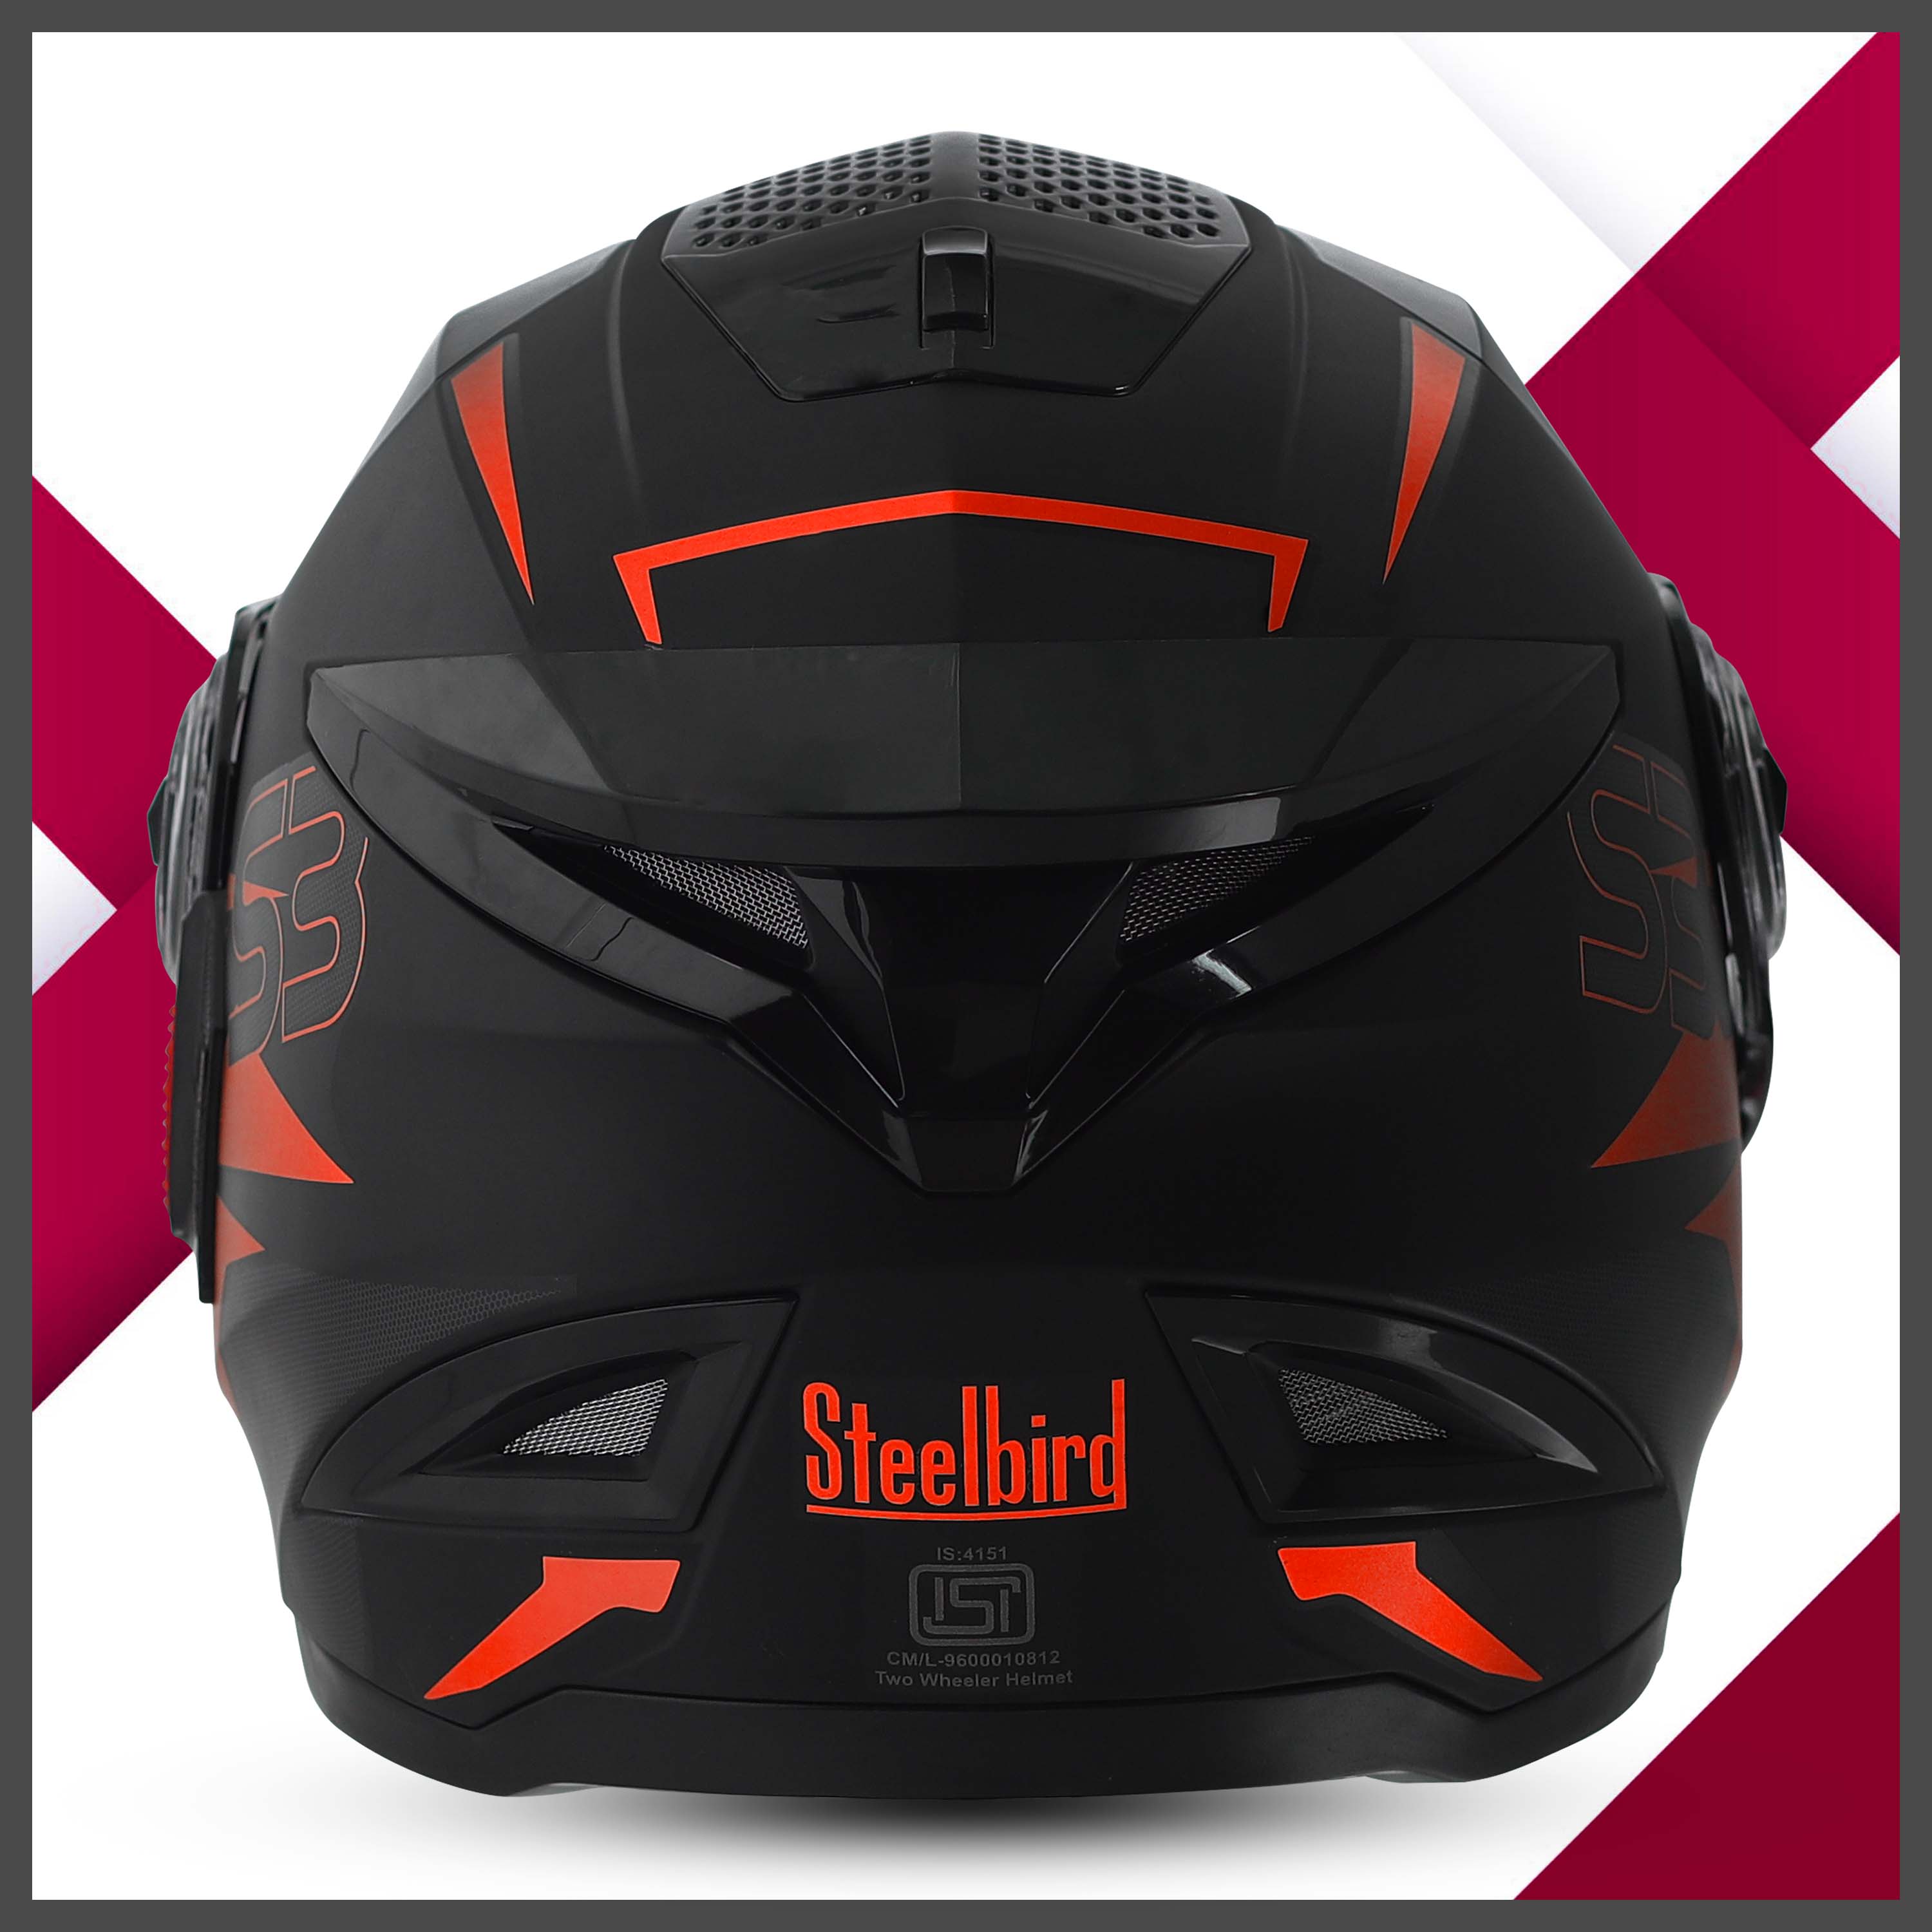 Steelbird SBH-17 Robot Terminator ISI Certified Full Face Chrome Graphic Helmet For Men And Women (Glossy Black Red With Smoke Visor)